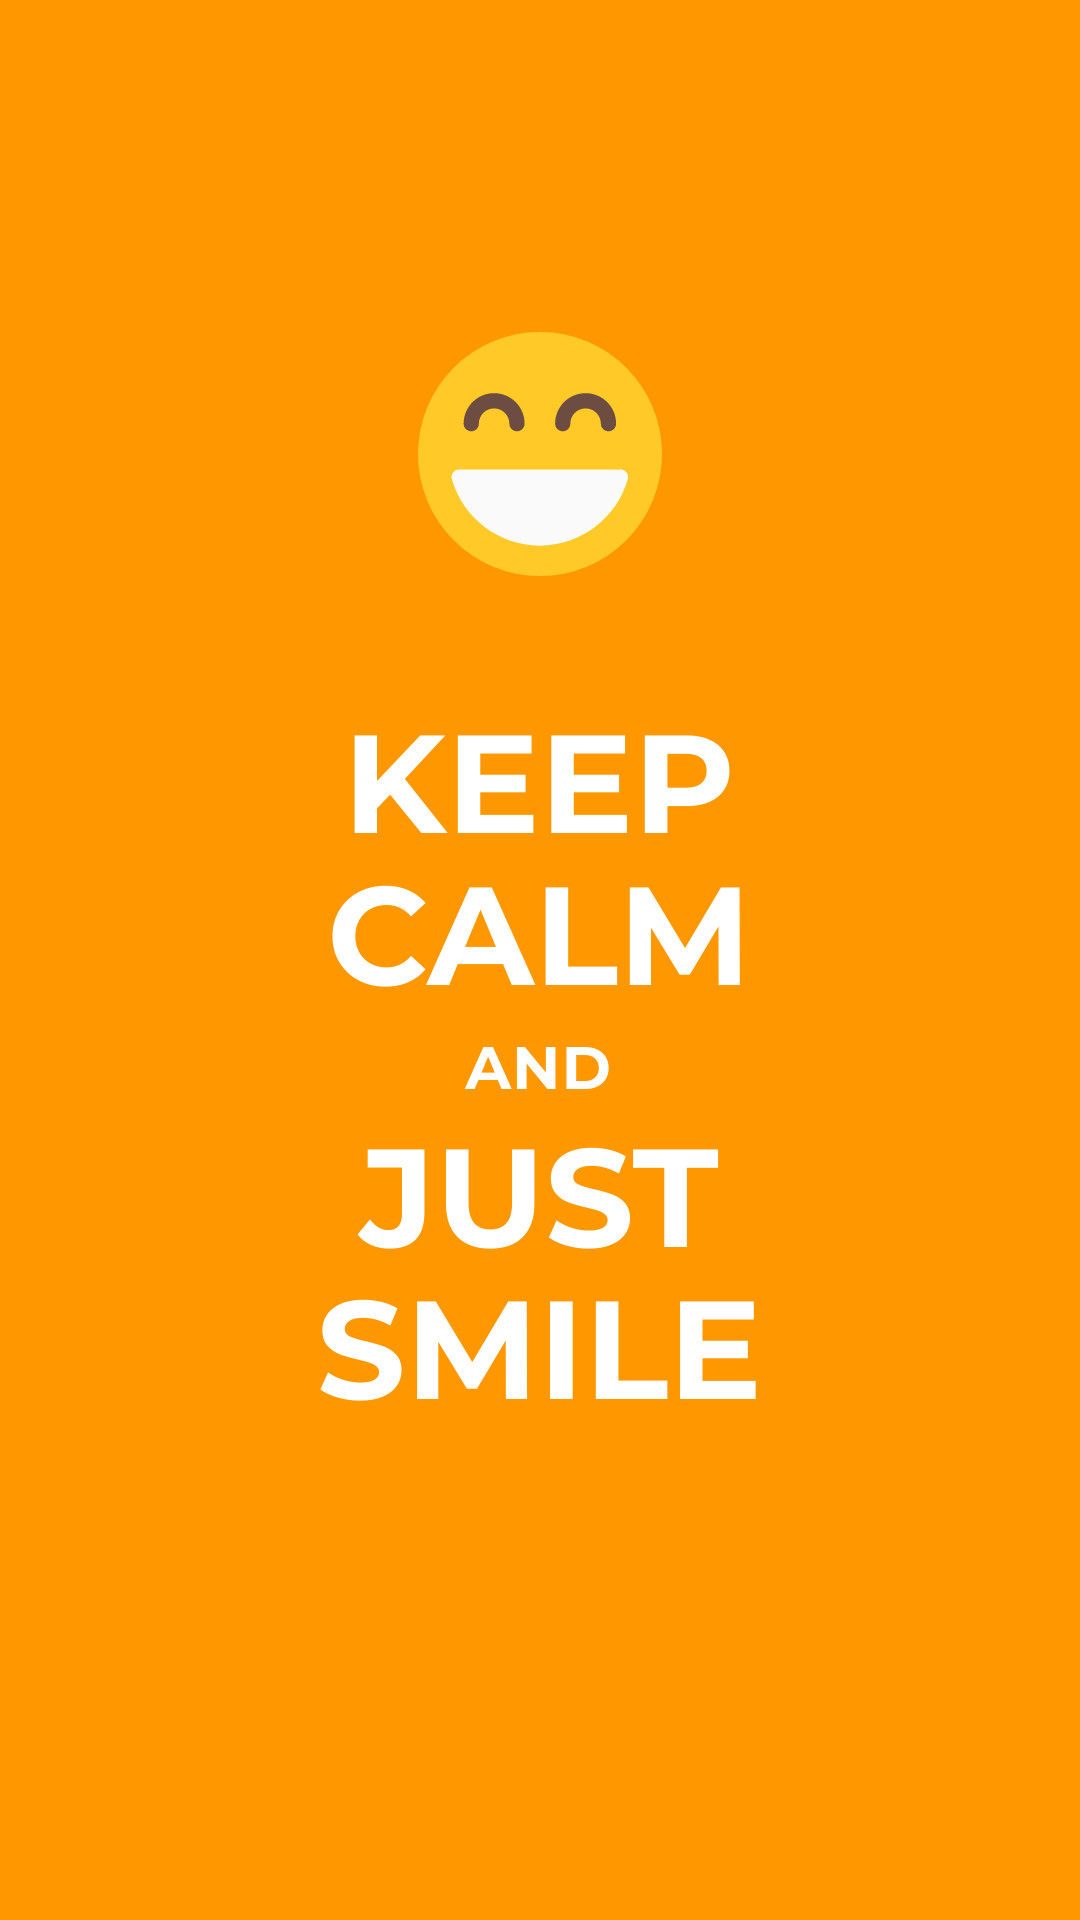 Keep Calm and Just Smile